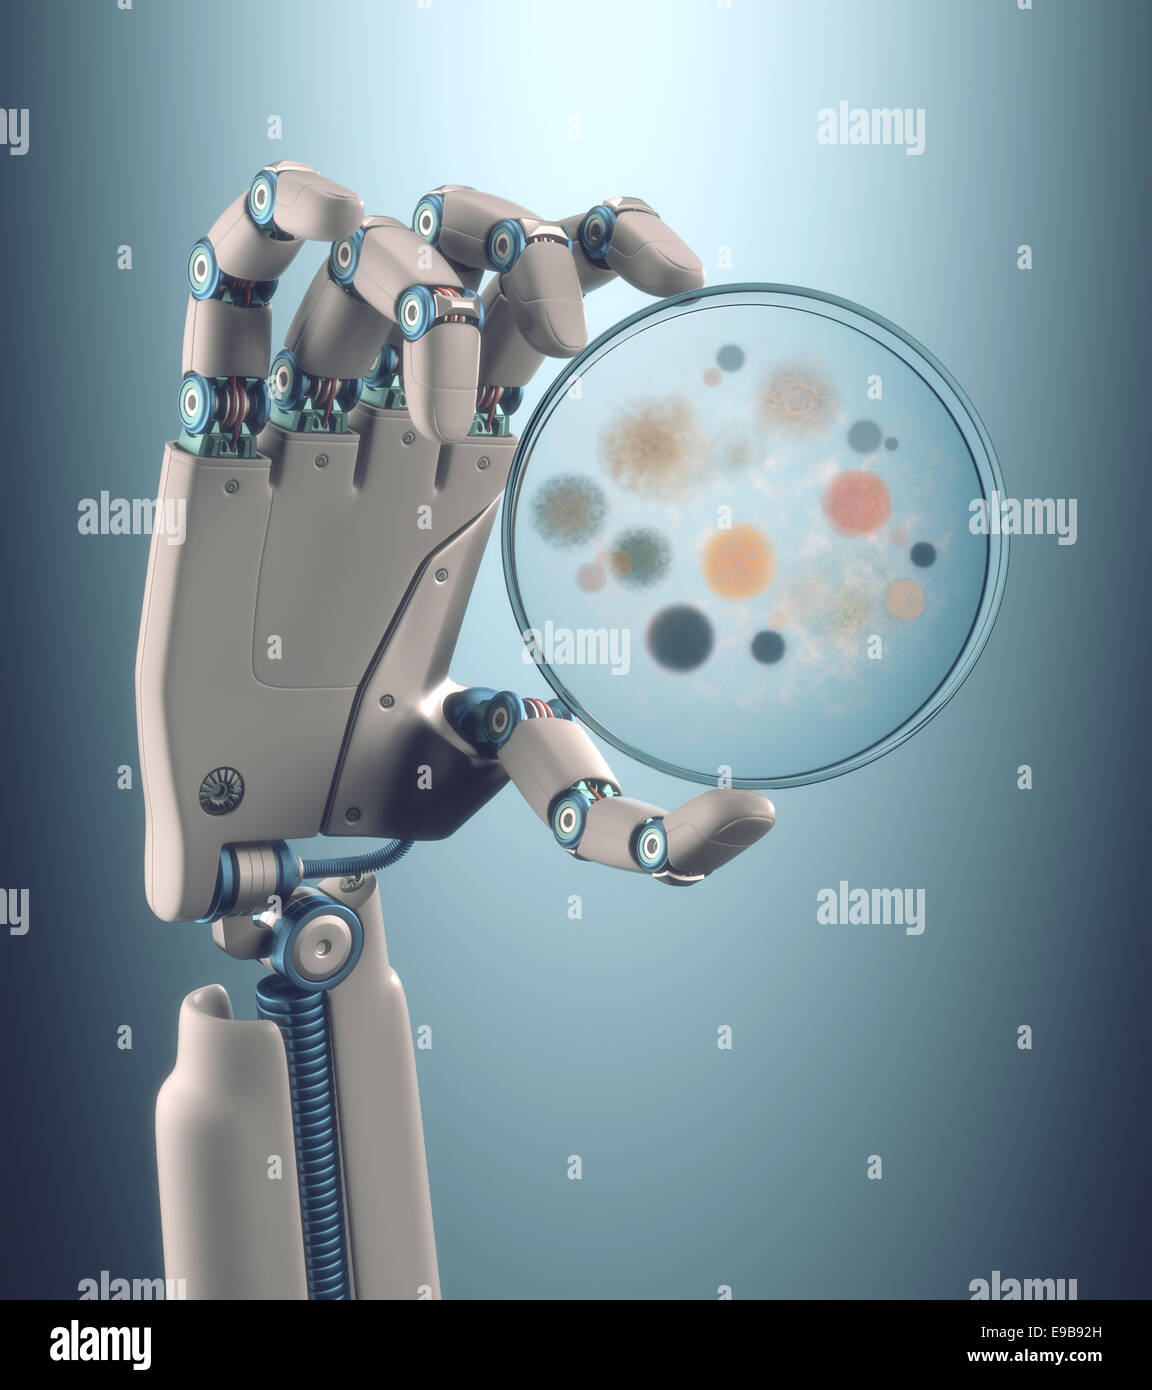 Robot hand holding a petri dish with colonies of bacteria and fungi. Clipping path included. Stock Photo